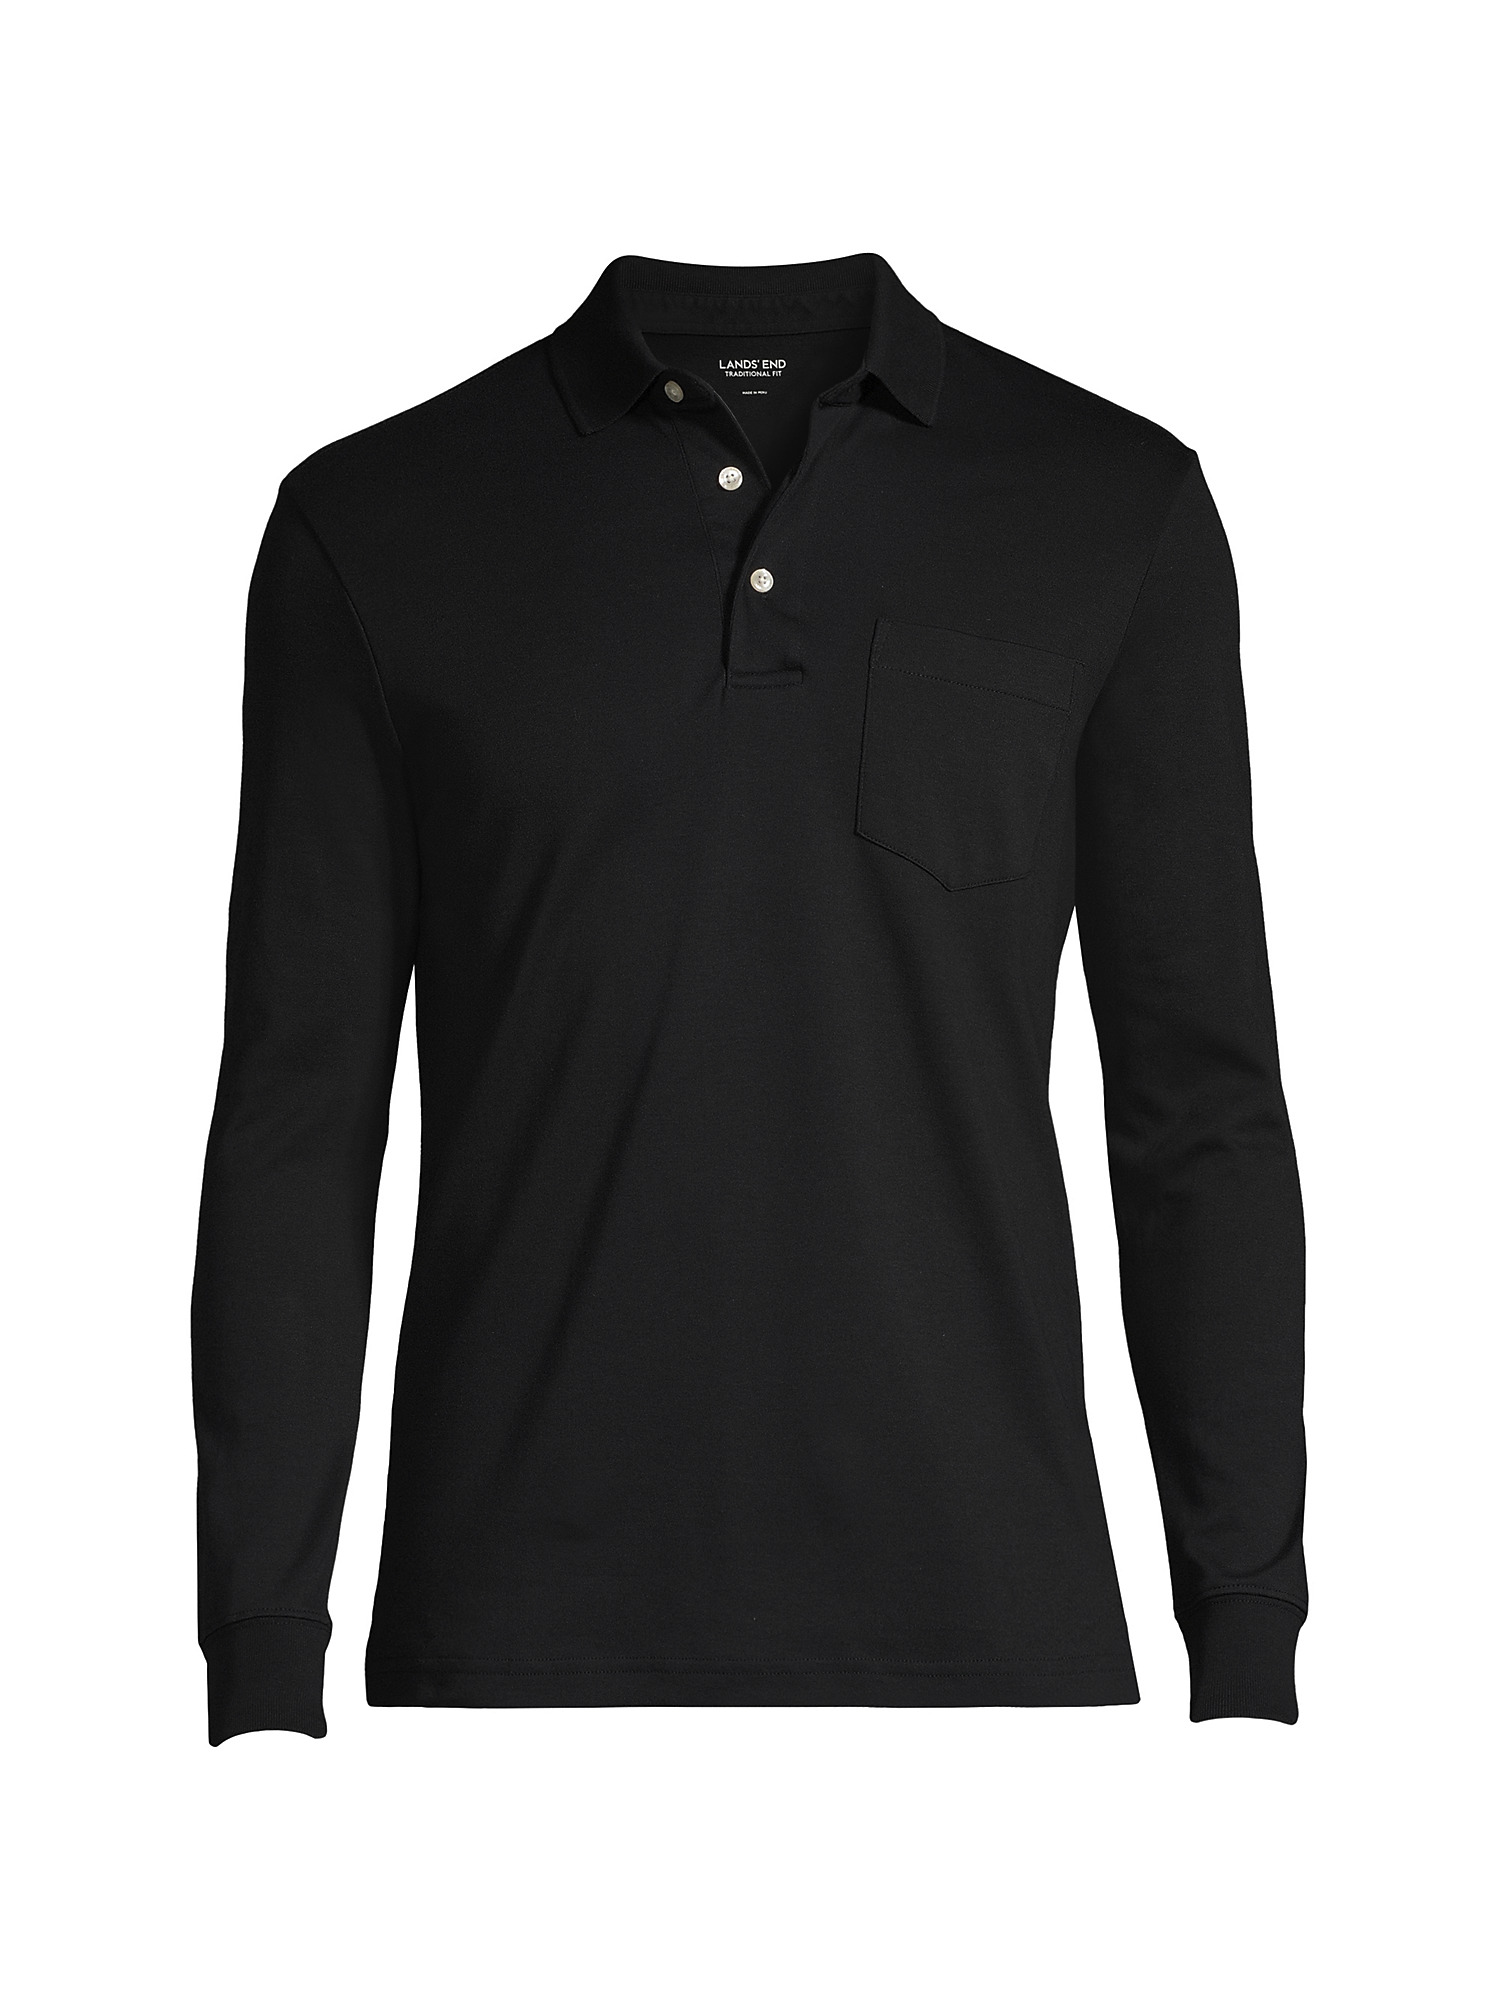 Lands' End Men's Big and Tall Long Sleeve Super Soft Supima Polo Shirt with  Pocket